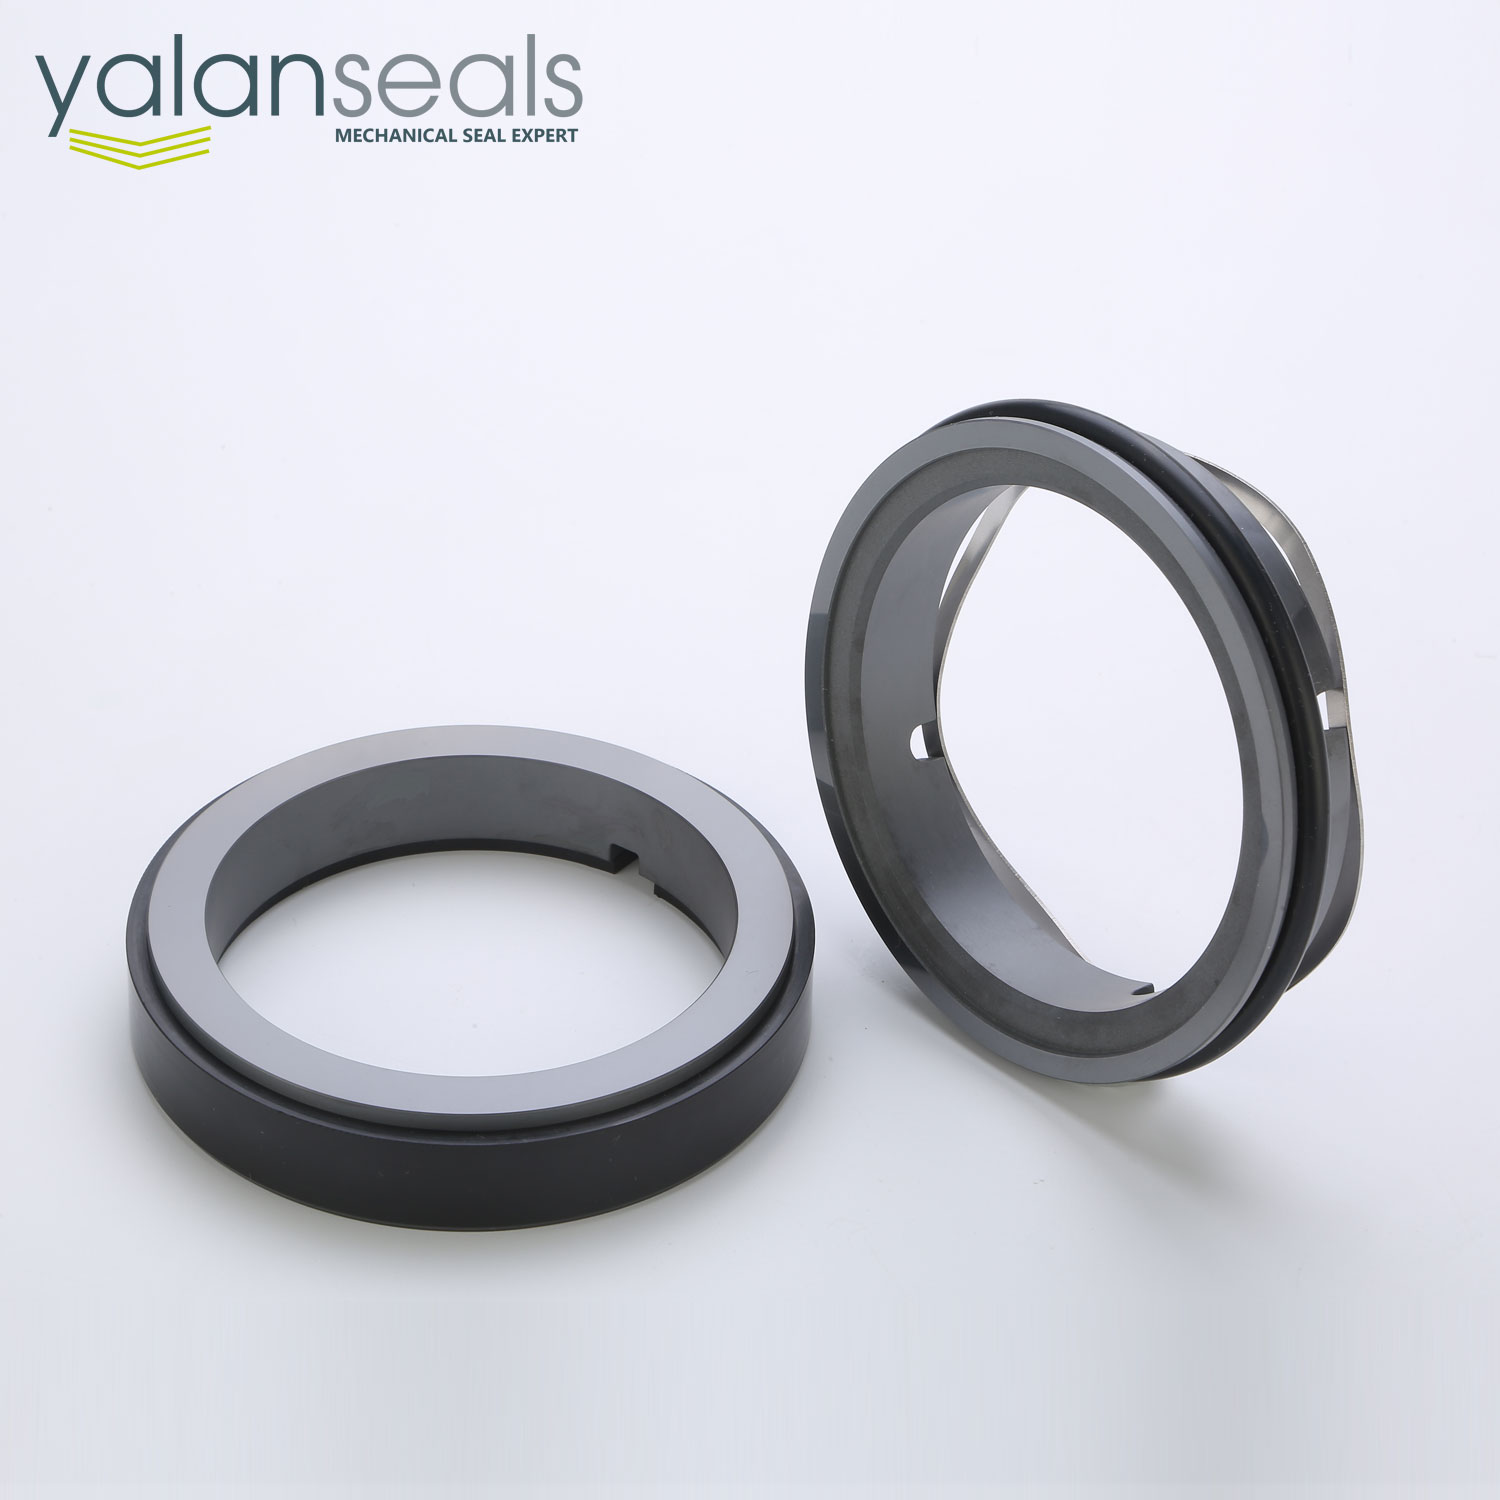 YALAN 45409-A-09 Wave Spring Mechanical Seal for Beverage Pumps and Food Mixers